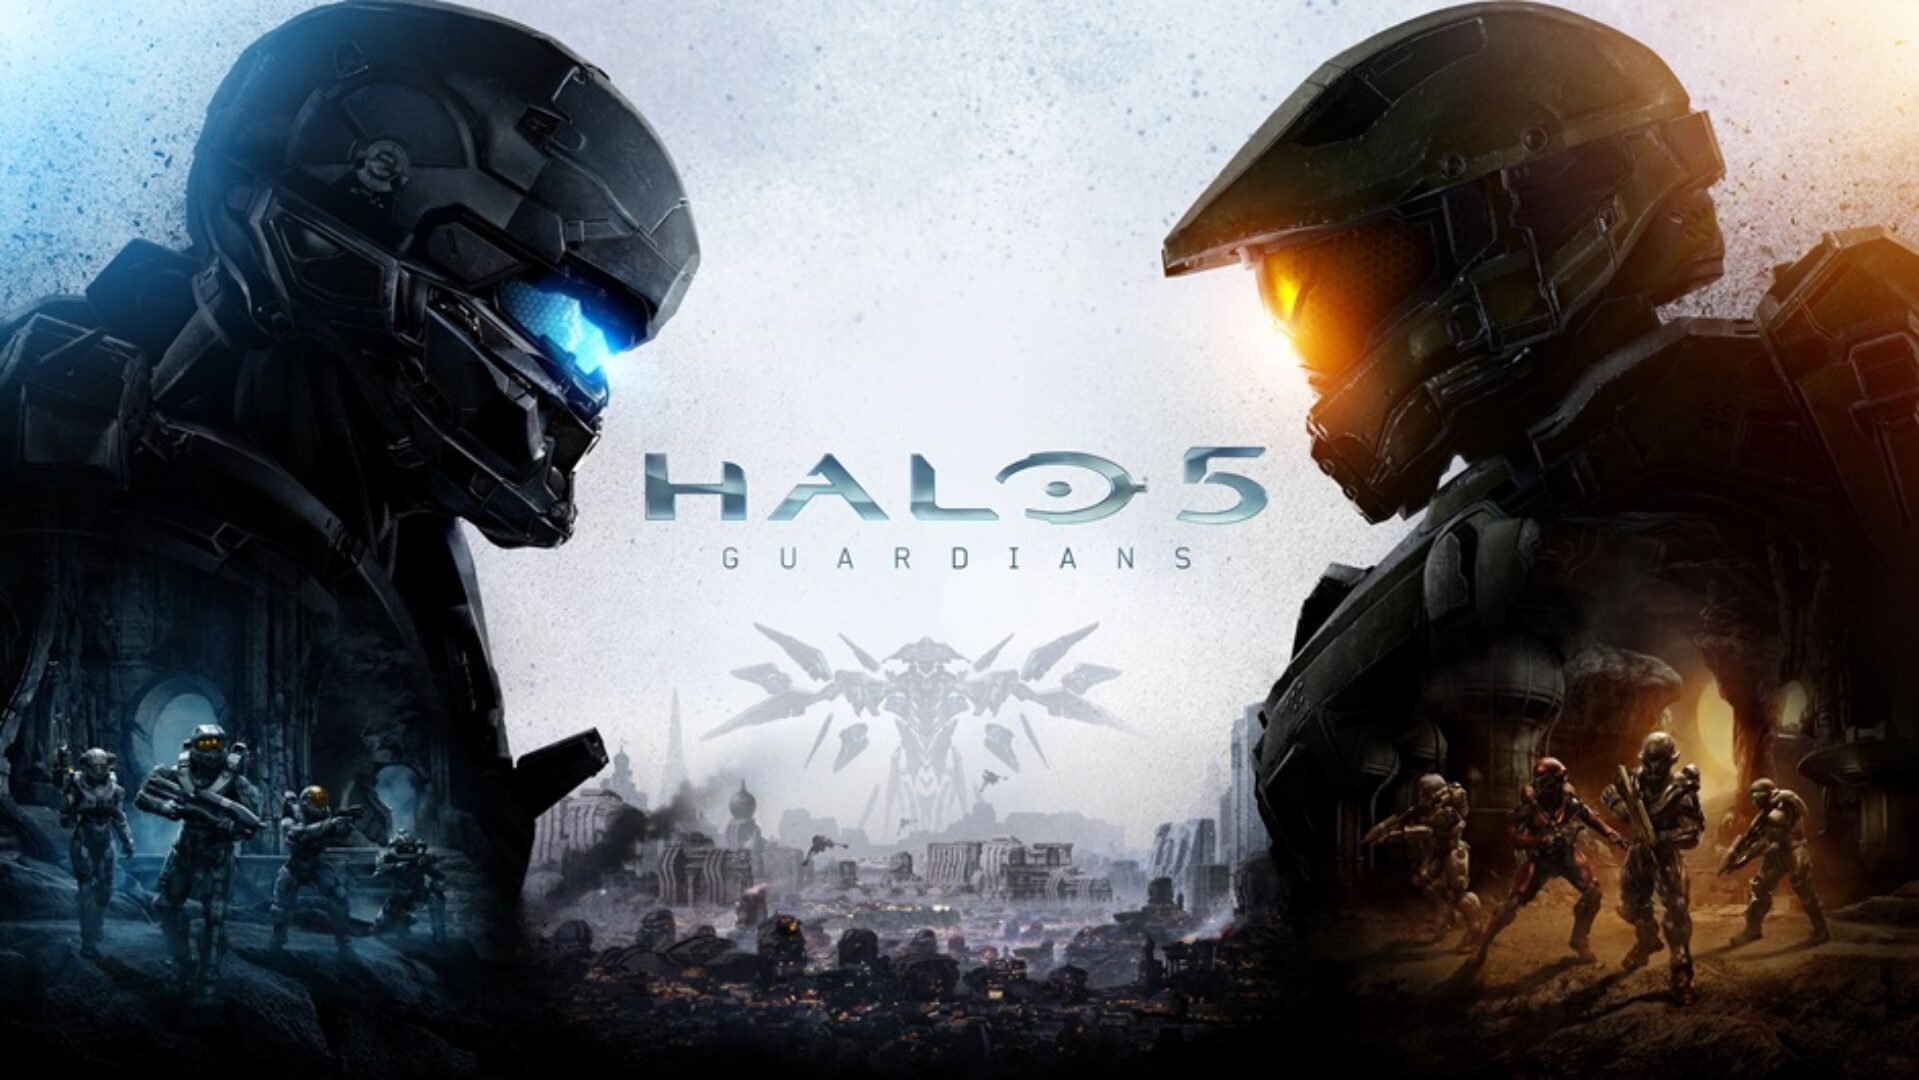 Free Halo 5: Guardians REQ Pack? Yes, please.